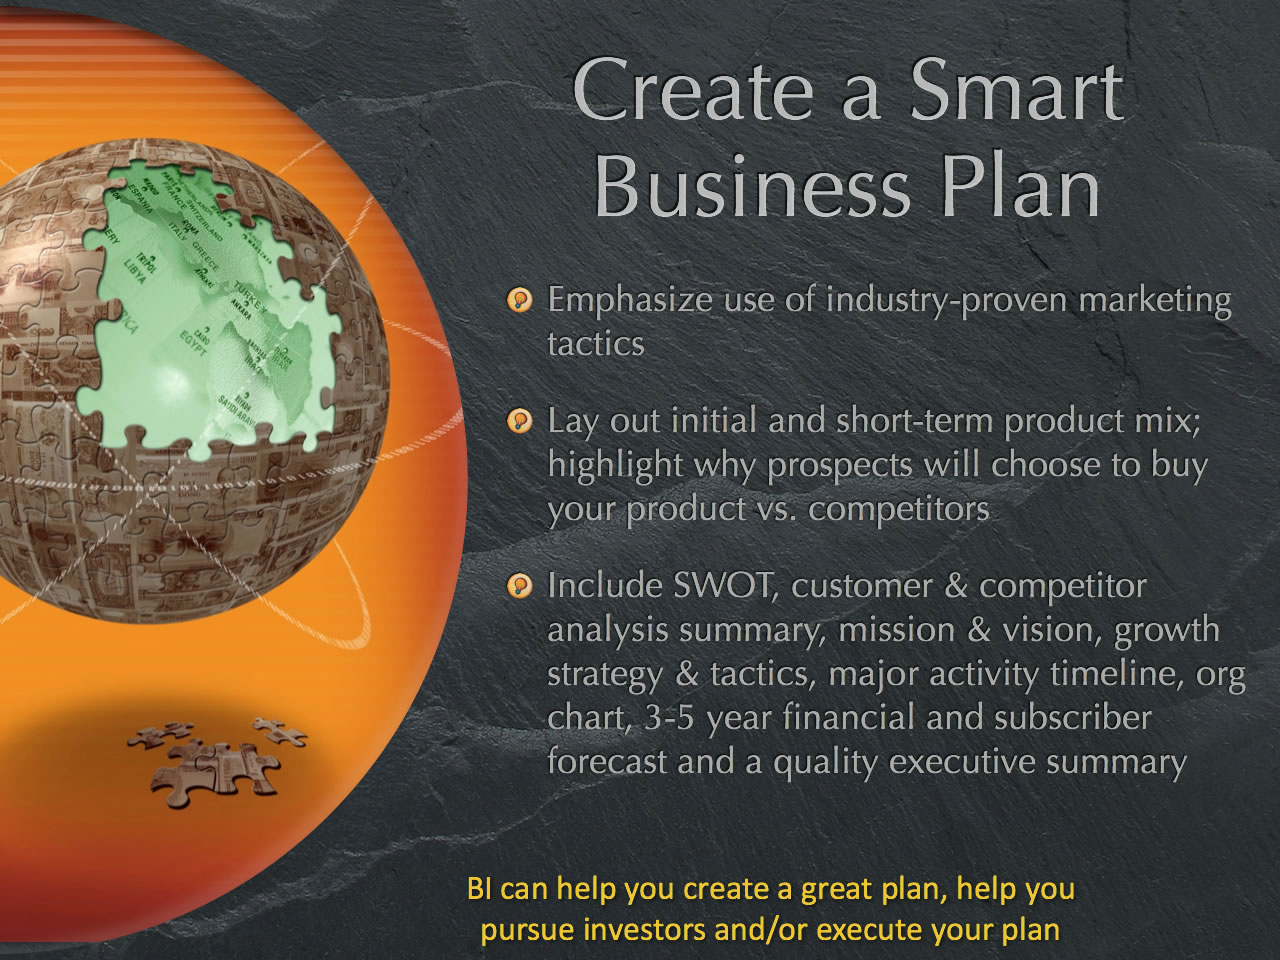 Create a smart investing newsletter startup business plan